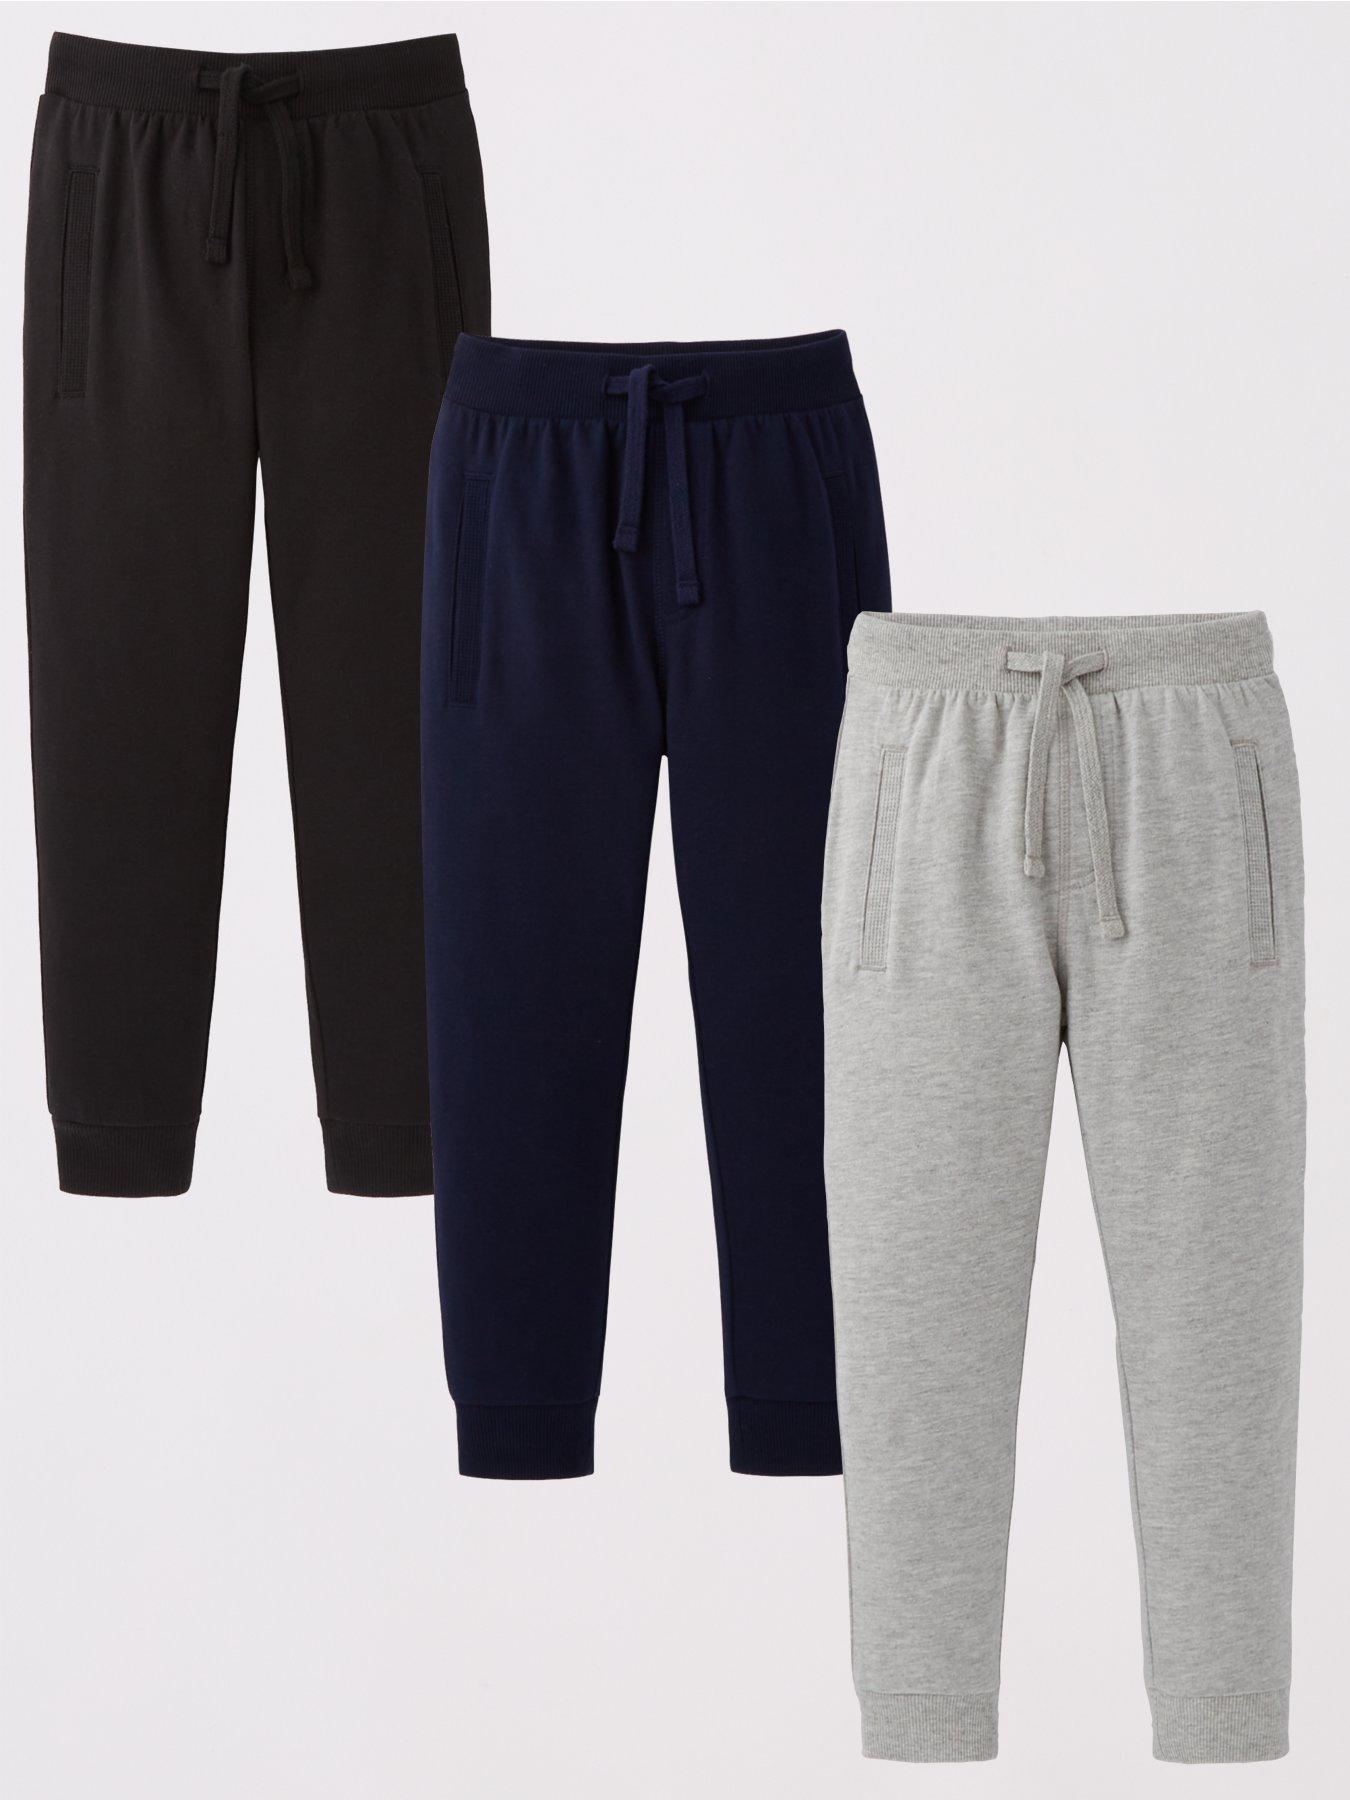 Jogging bottoms, Boys clothes, Child & baby